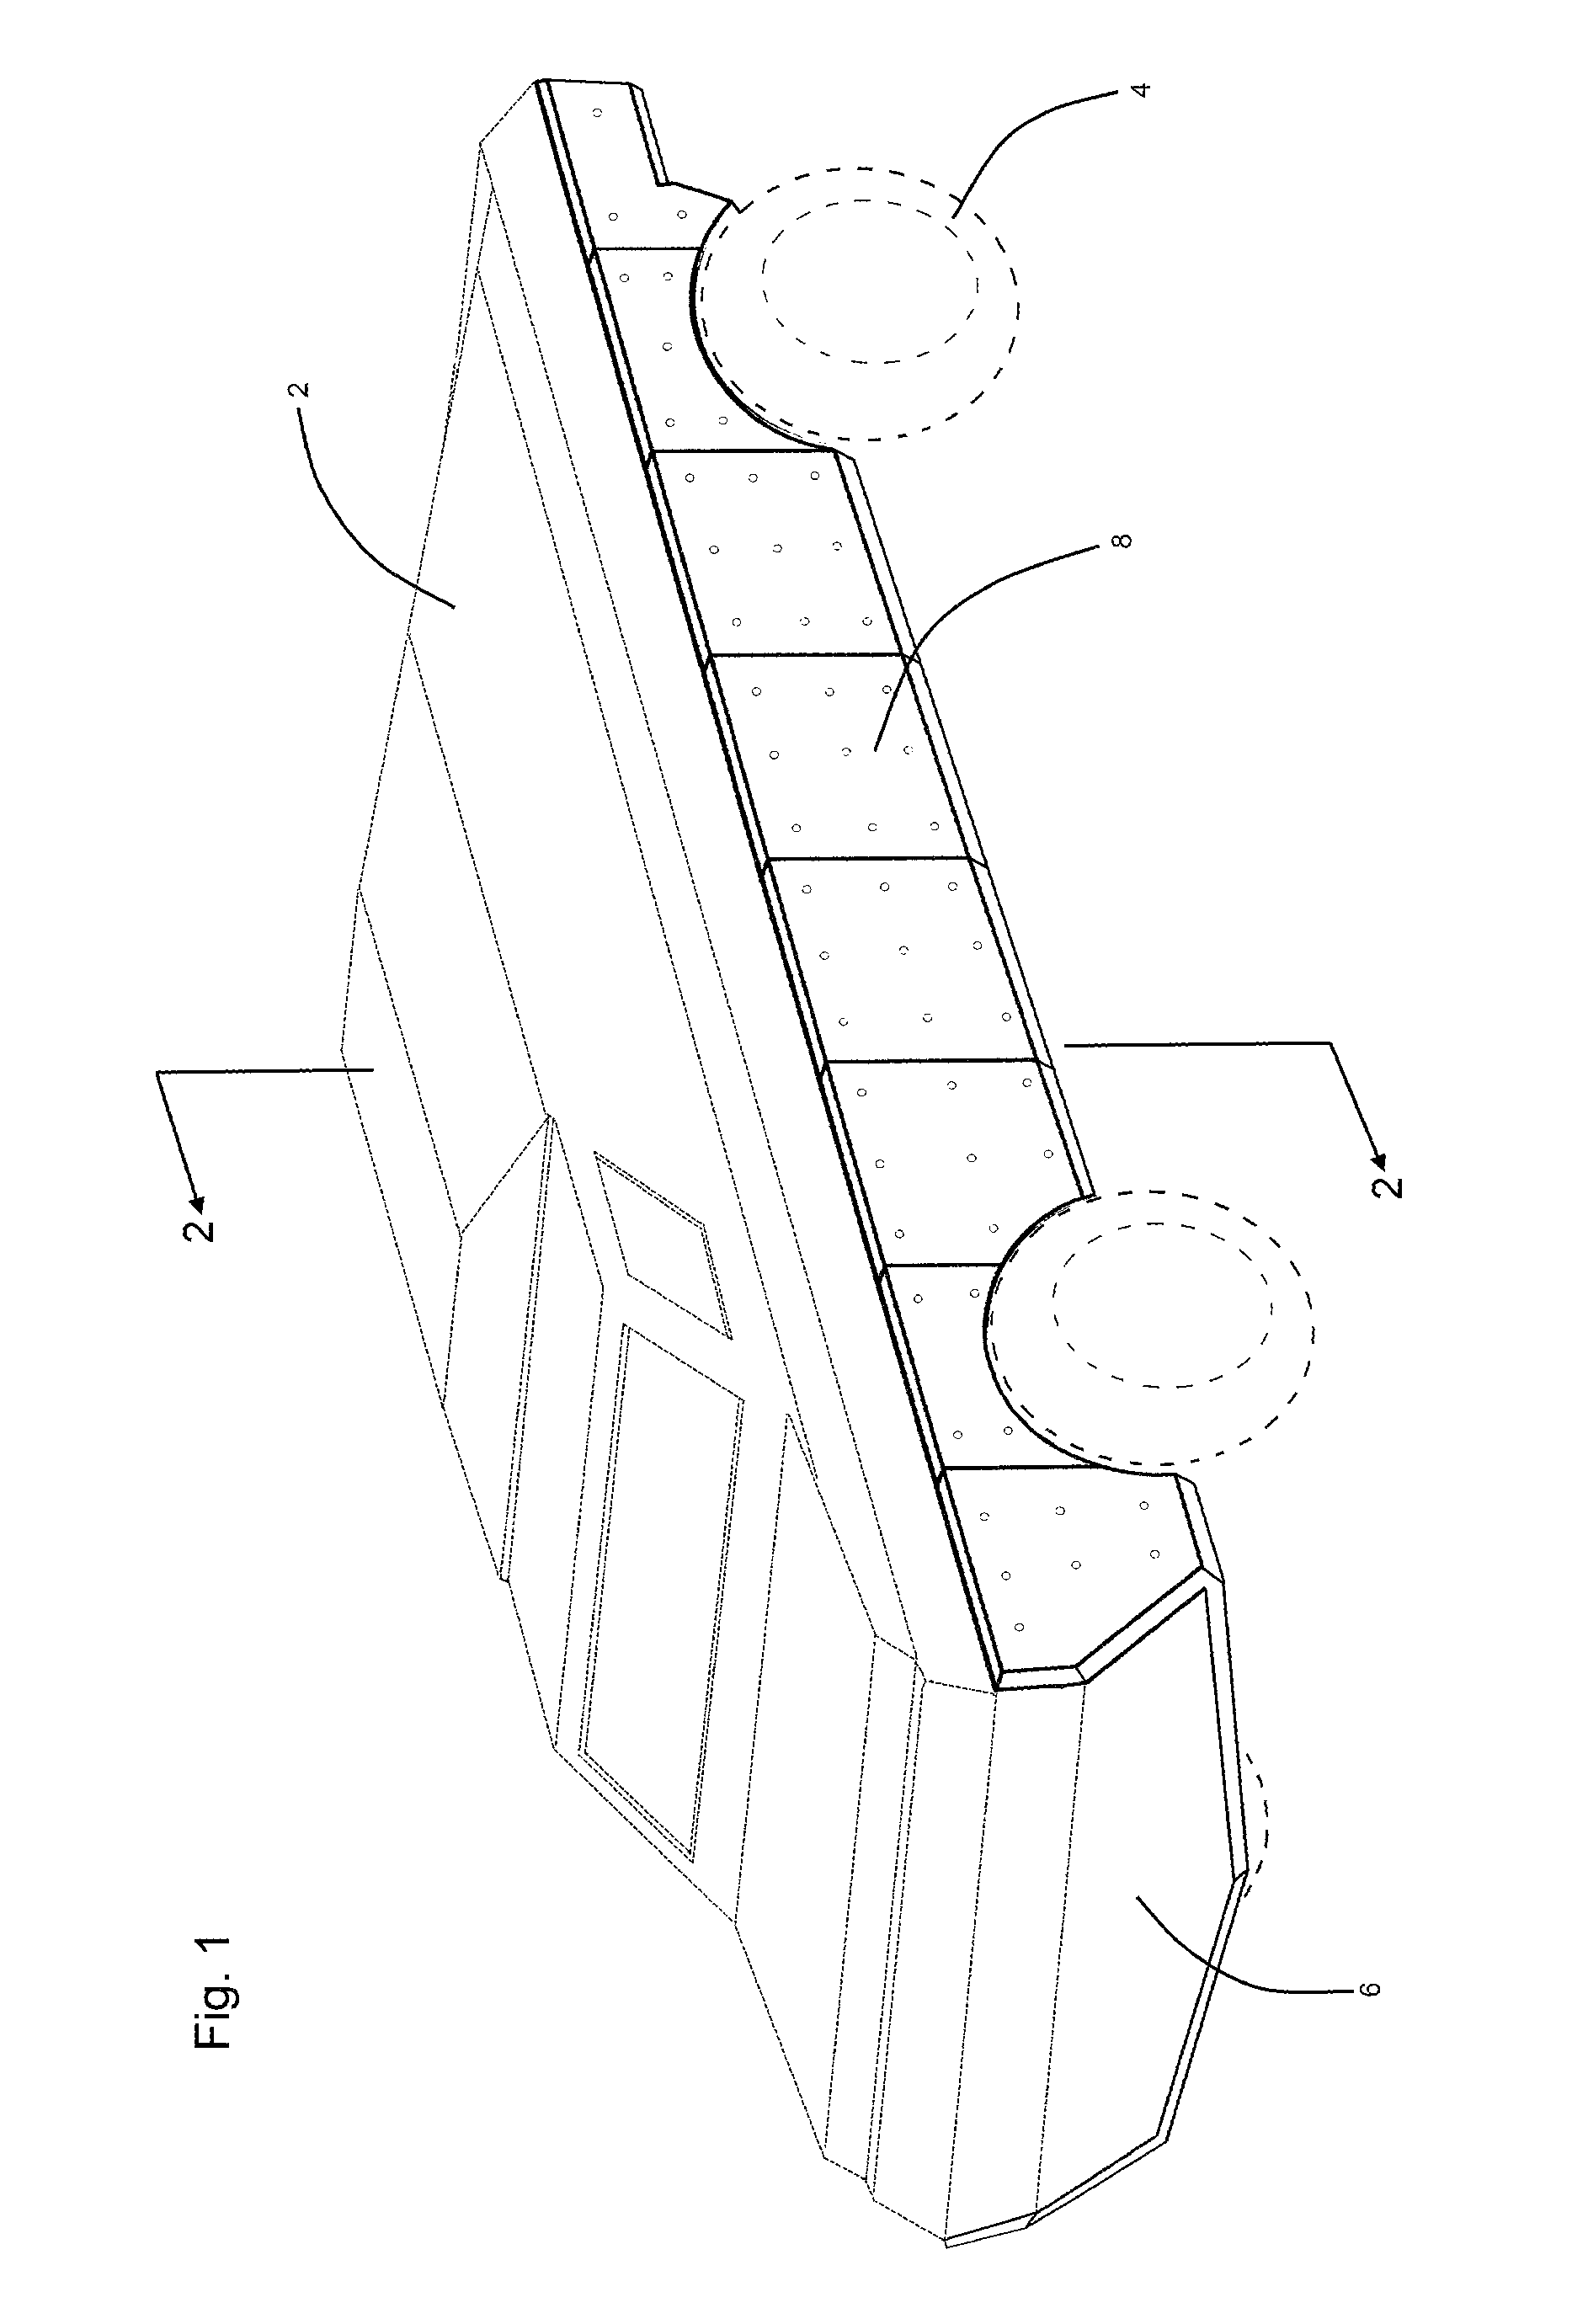 Assembly for armoring an amphibious vehicle against projectile penetrations